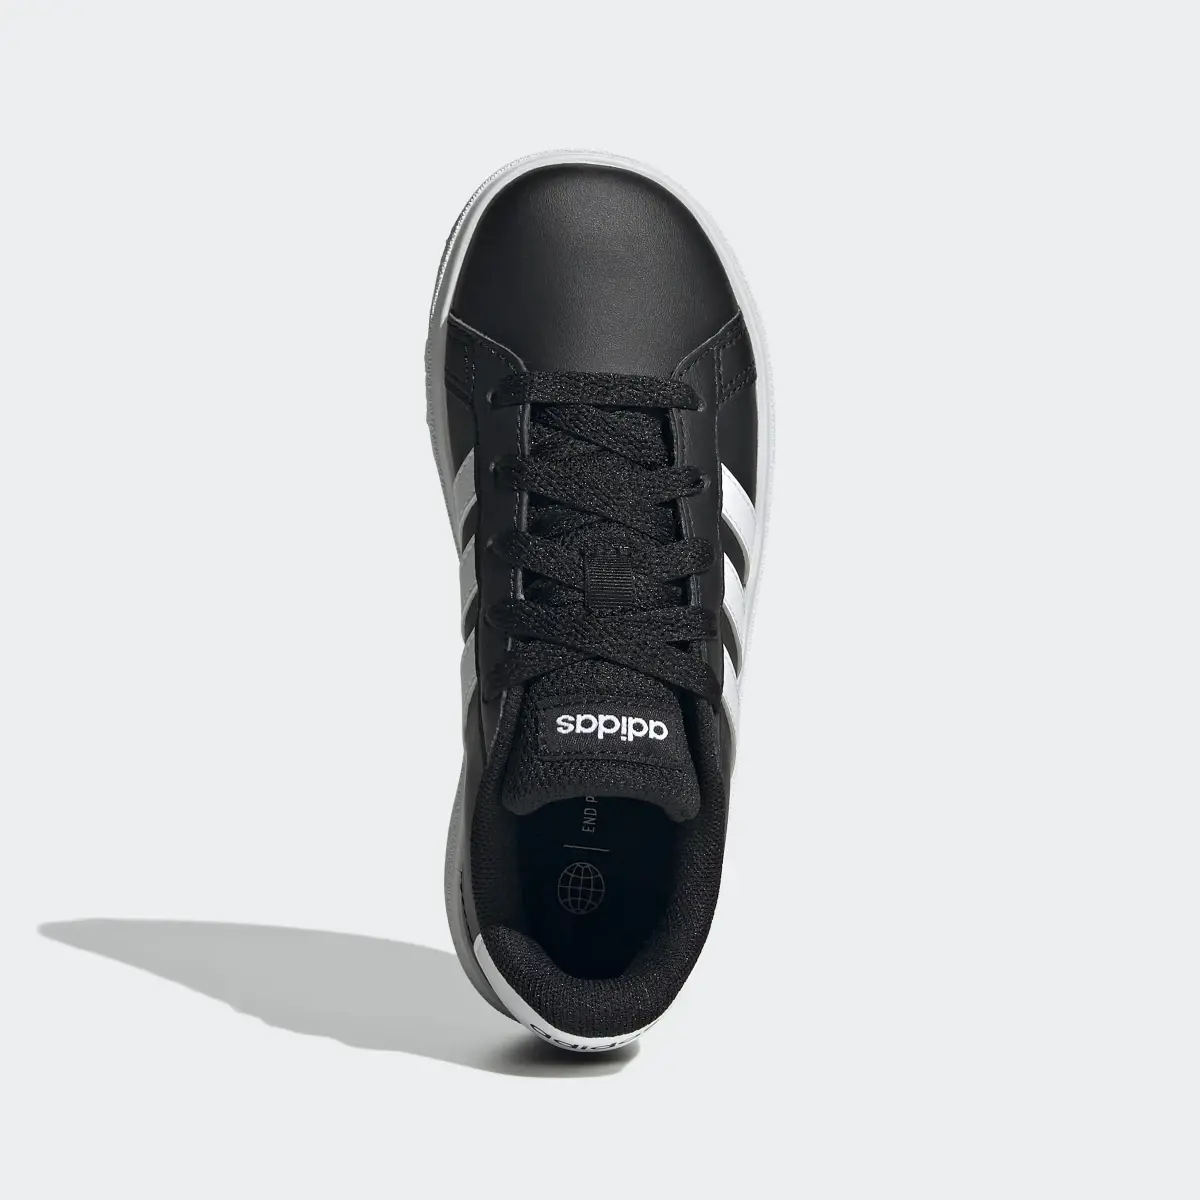 Adidas Grand Court Lifestyle Tennis Lace-Up Schuh. 3